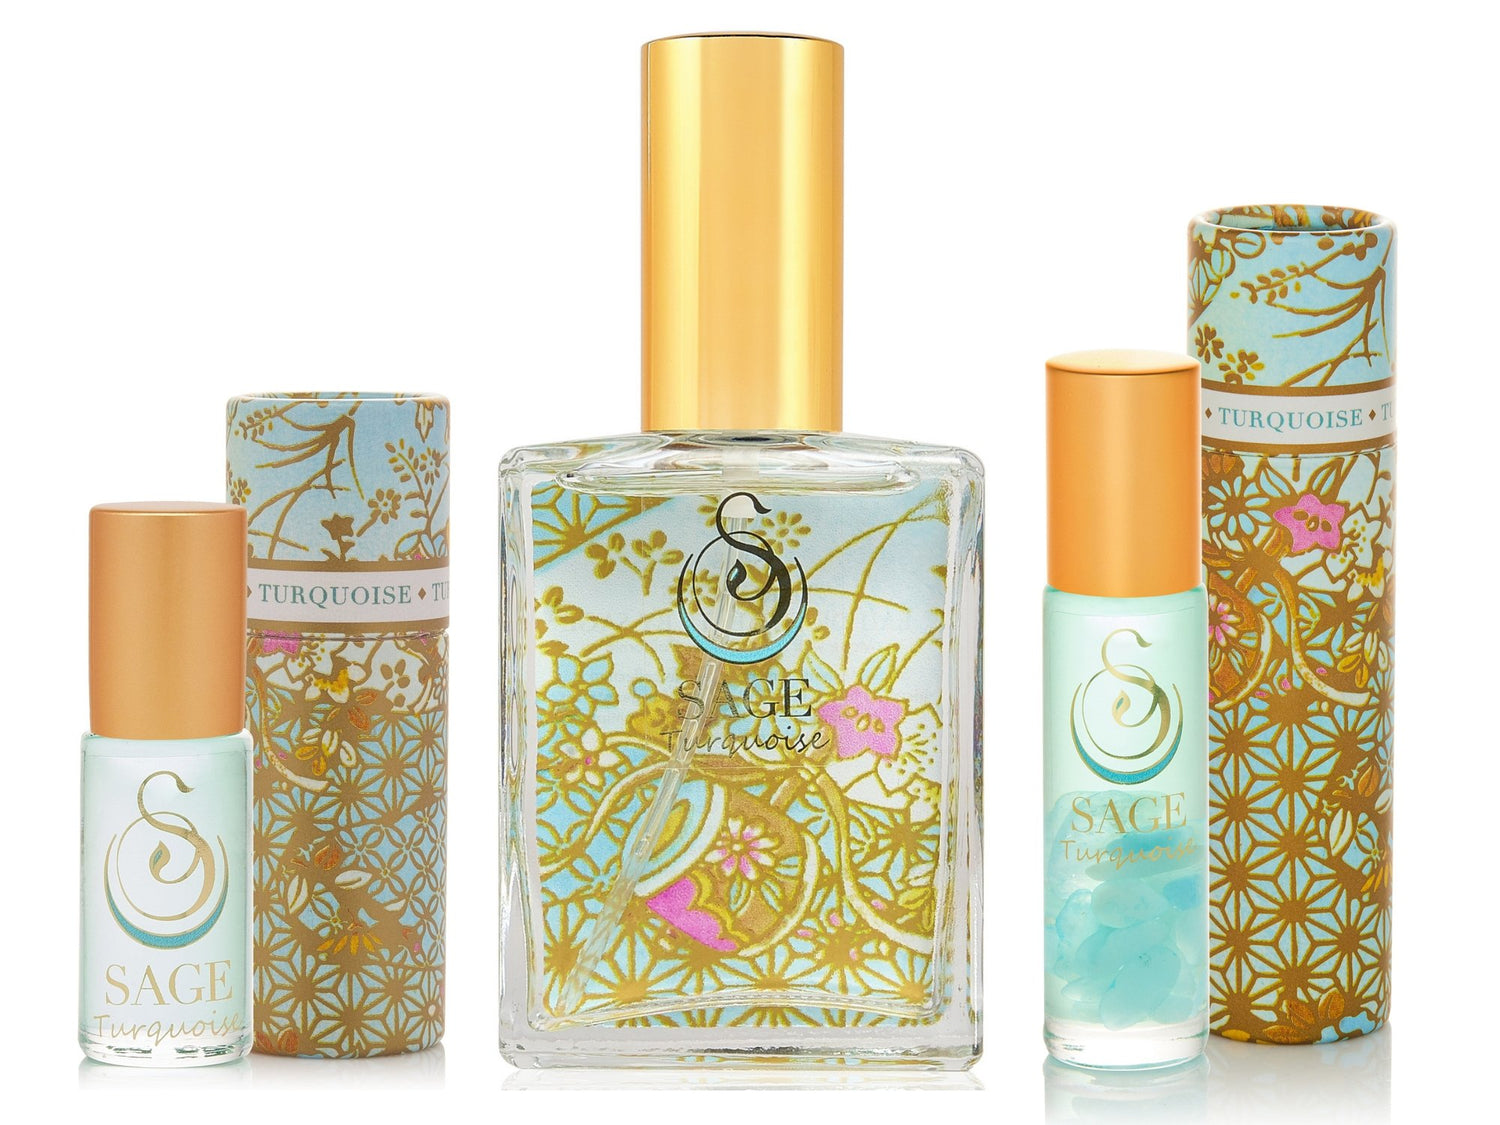 OBSESSION ~ Turquoise Gemstone Perfume Roll-On and EDT Gift Set by Sage - The Sage Lifestyle